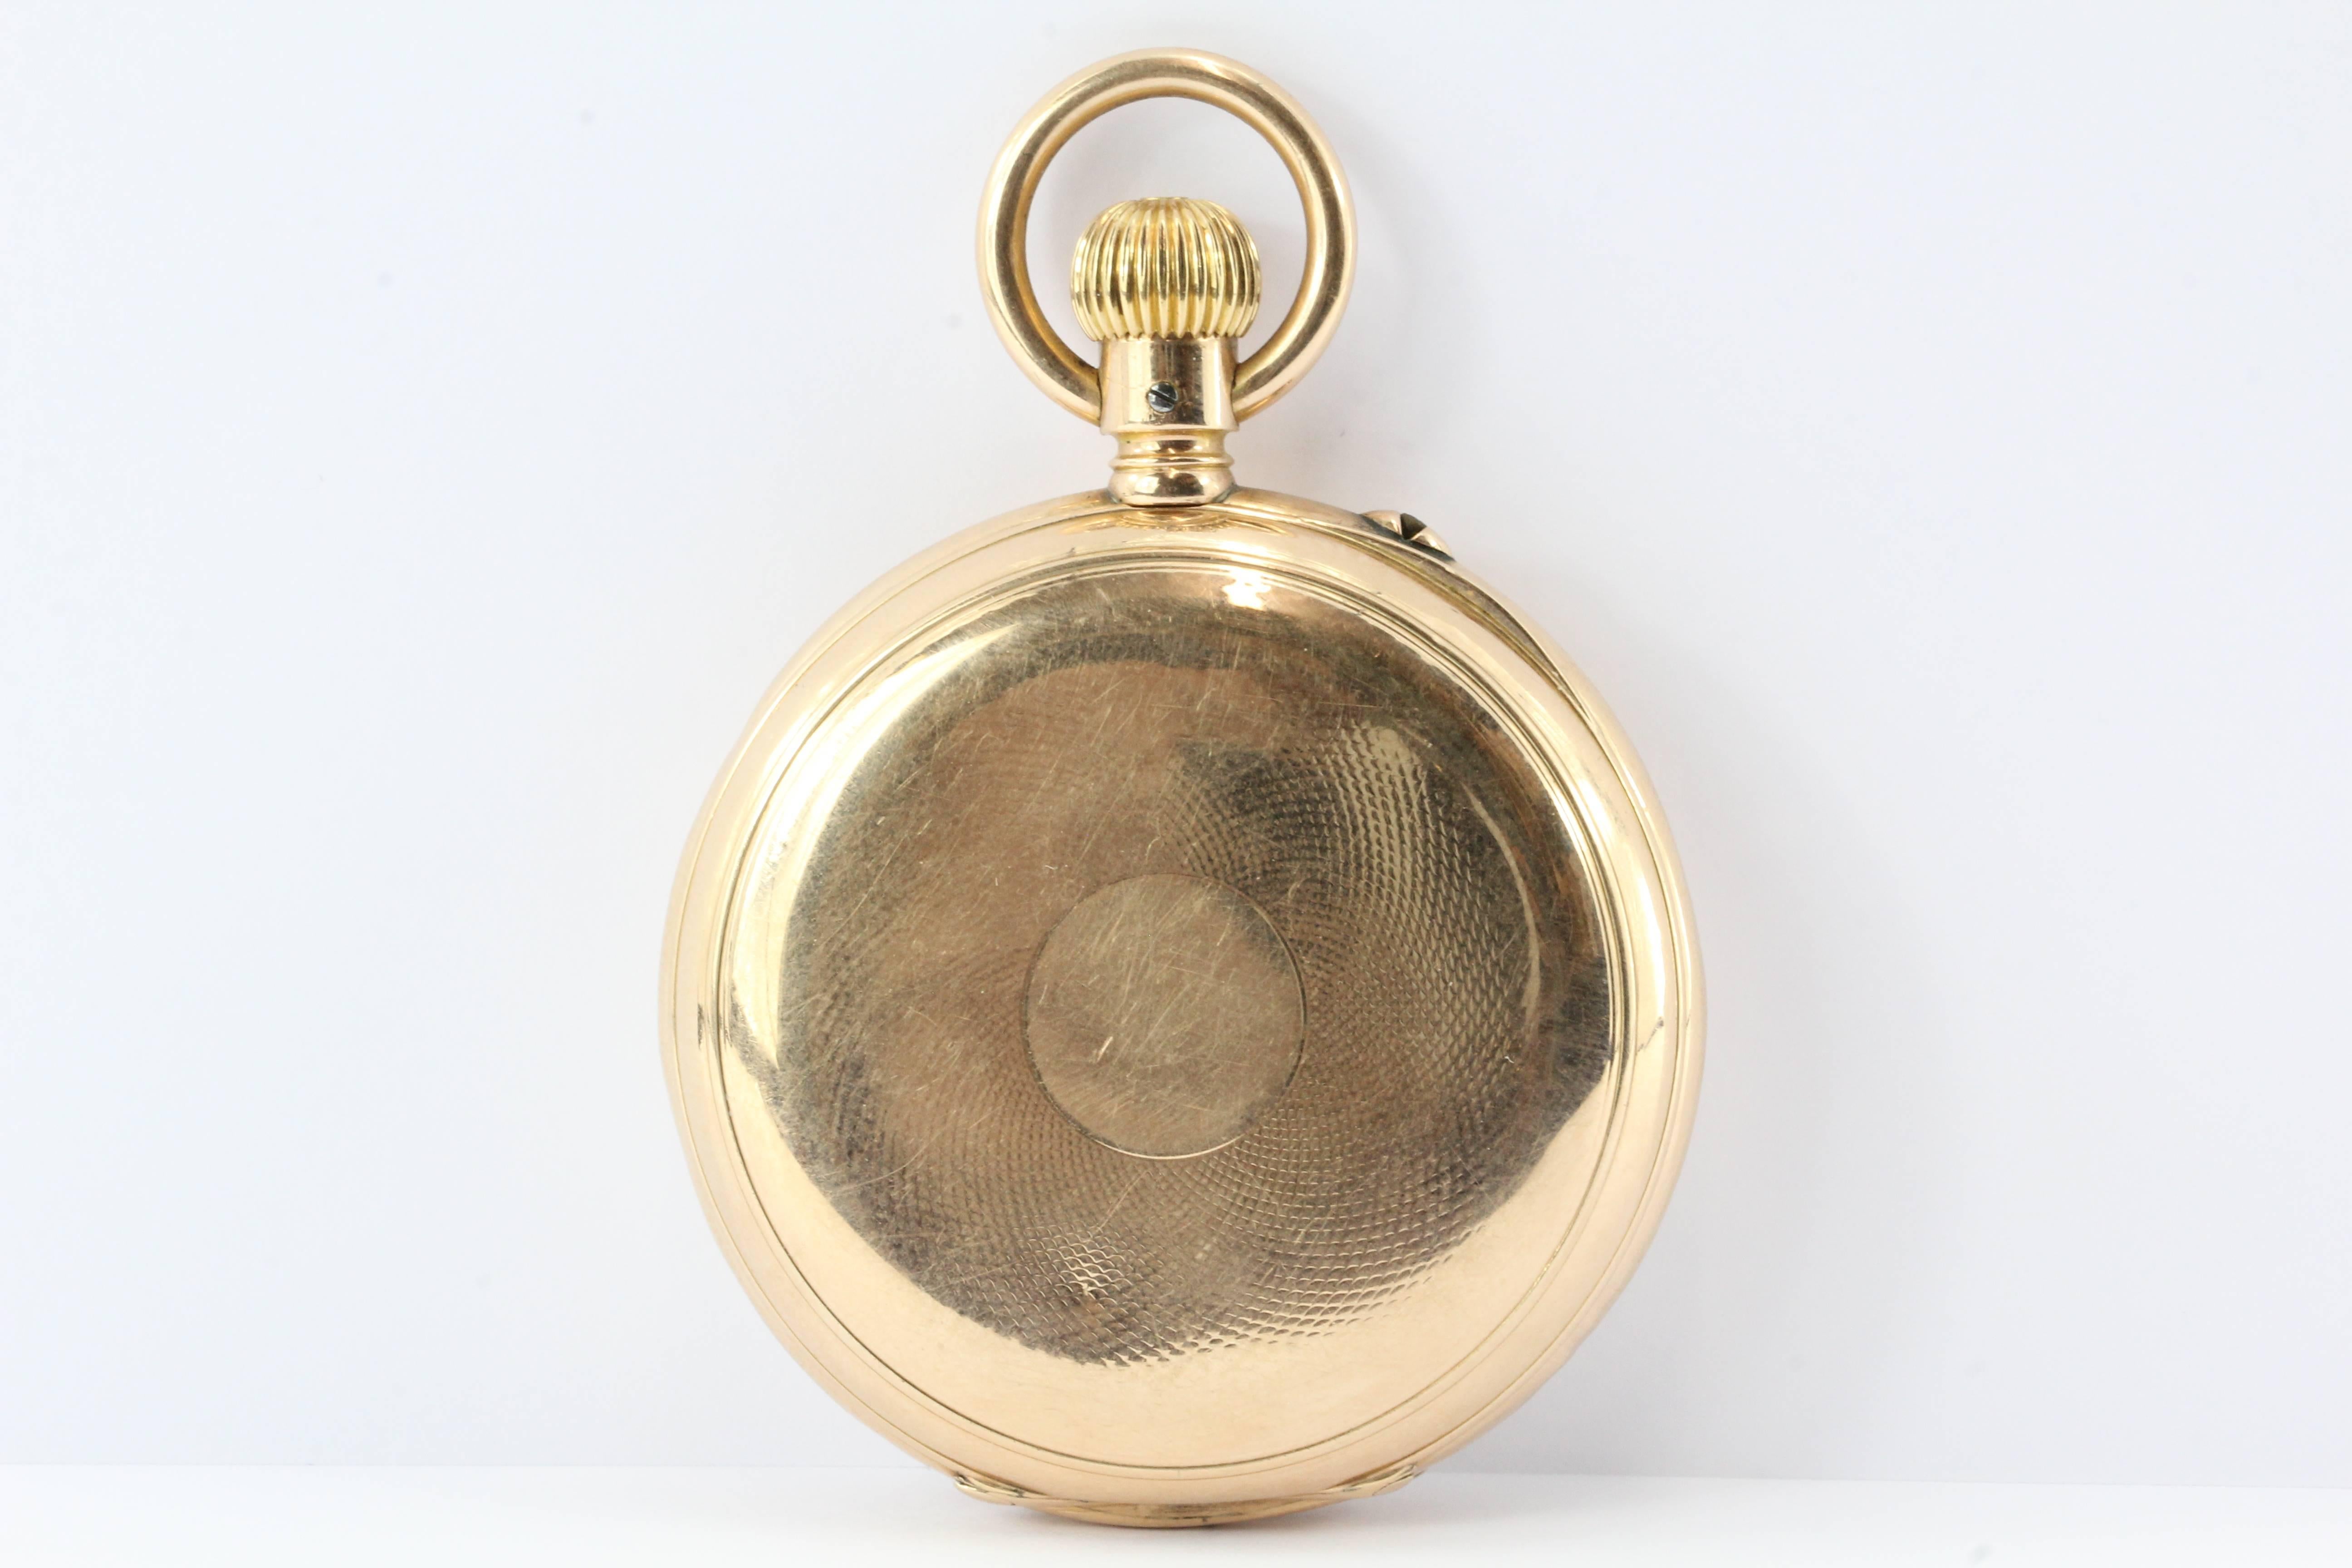 A. Lange & Sohne Glashutte I/S 43mm German 14K Gold Pocket Watch Circa 1897. The watch is in excellent estate condition and ready to use. . The dial is flawless as is the crystal and the case is not monogrammed. The dial measures 43mm in